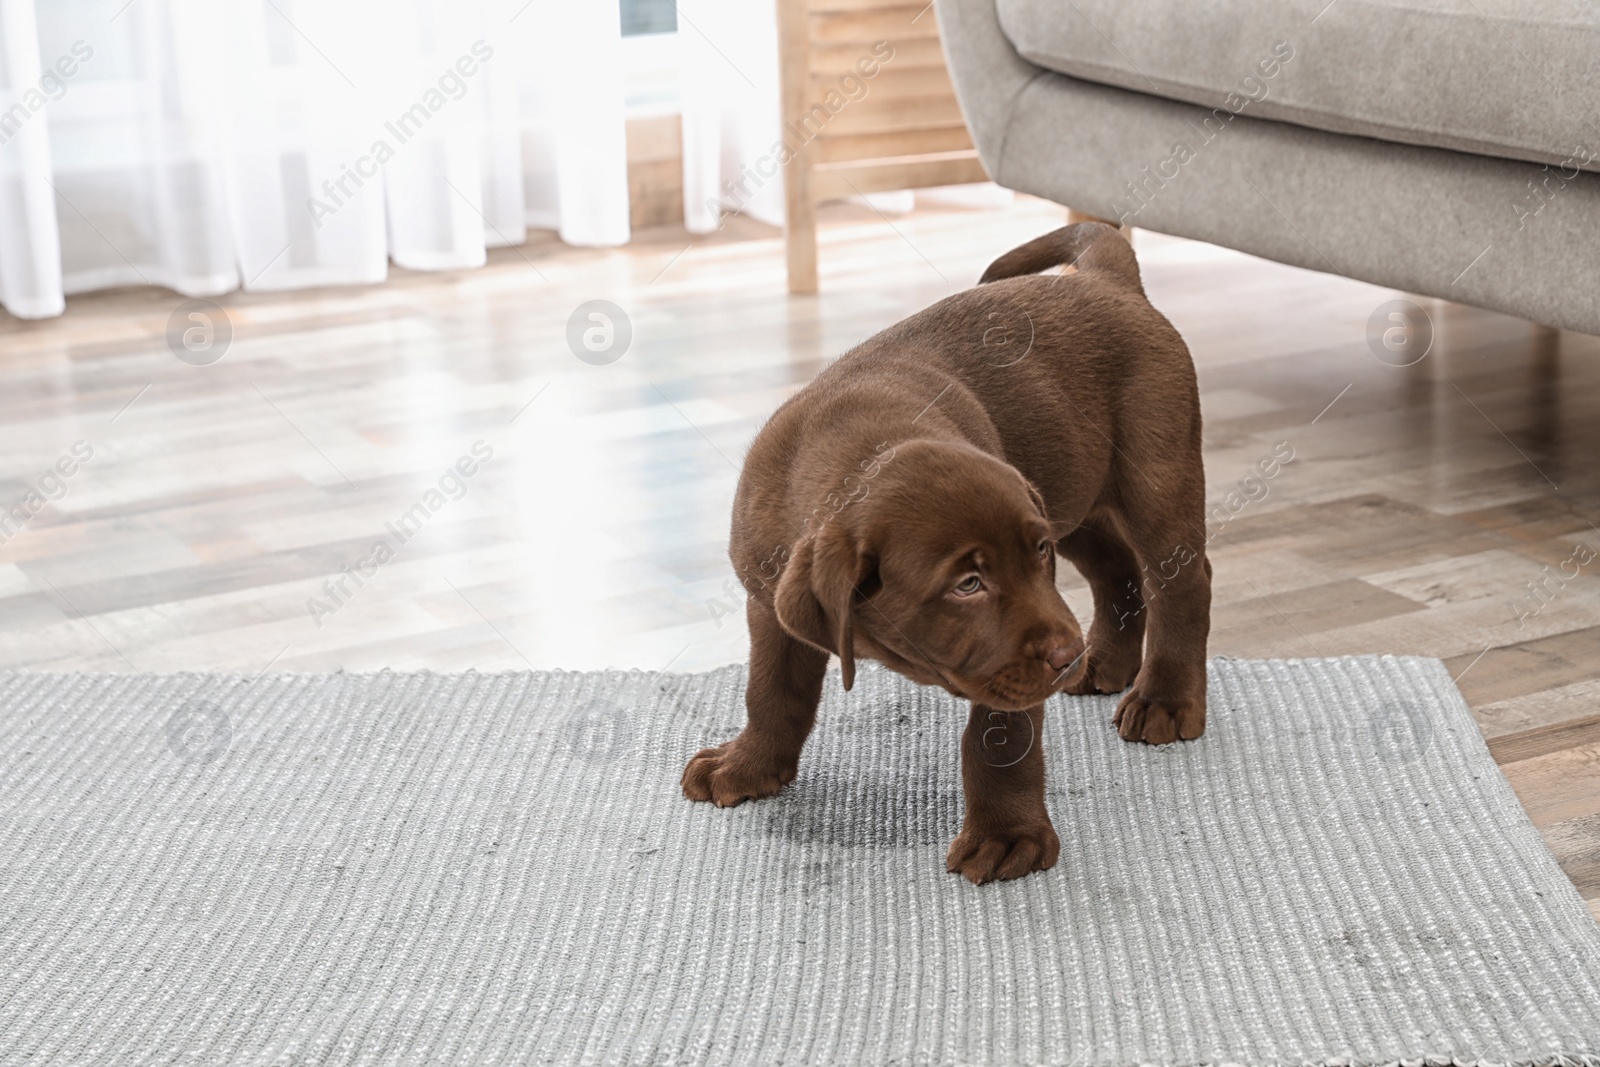 Photo of Chocolate Labrador Retriever puppy and wet spot on carpet indoors